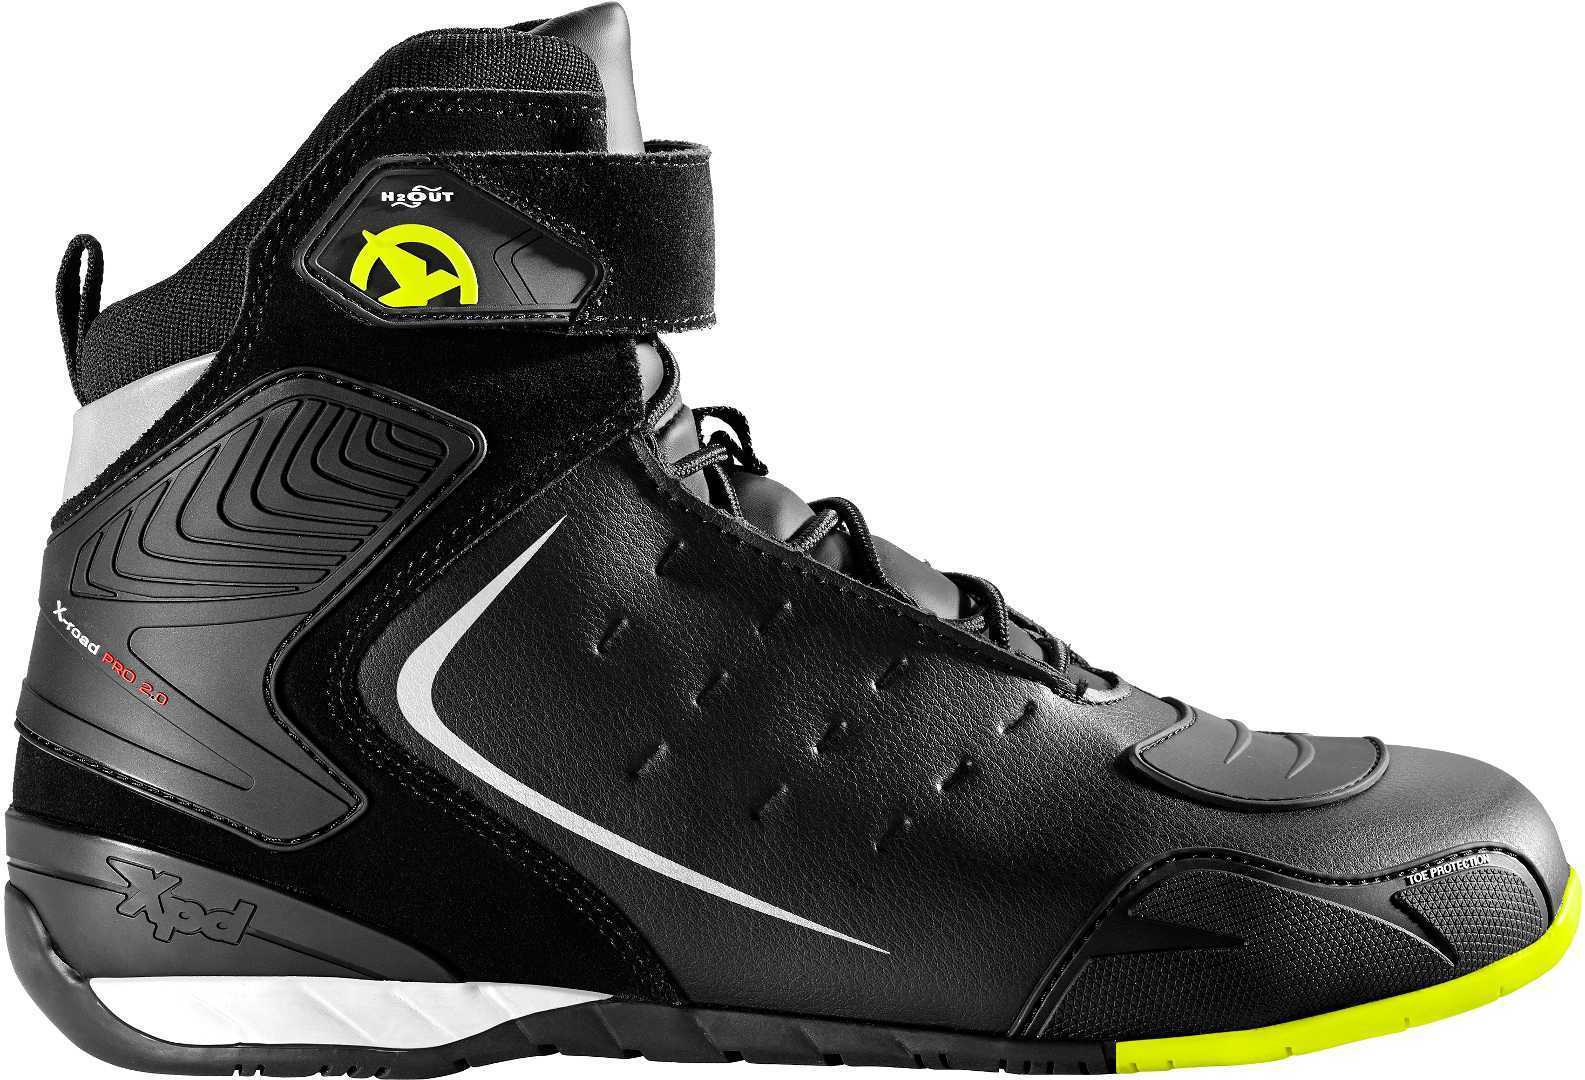 Image of XPD X-Road H2Out Yellow Fluo Size 44 ID 8030161345162